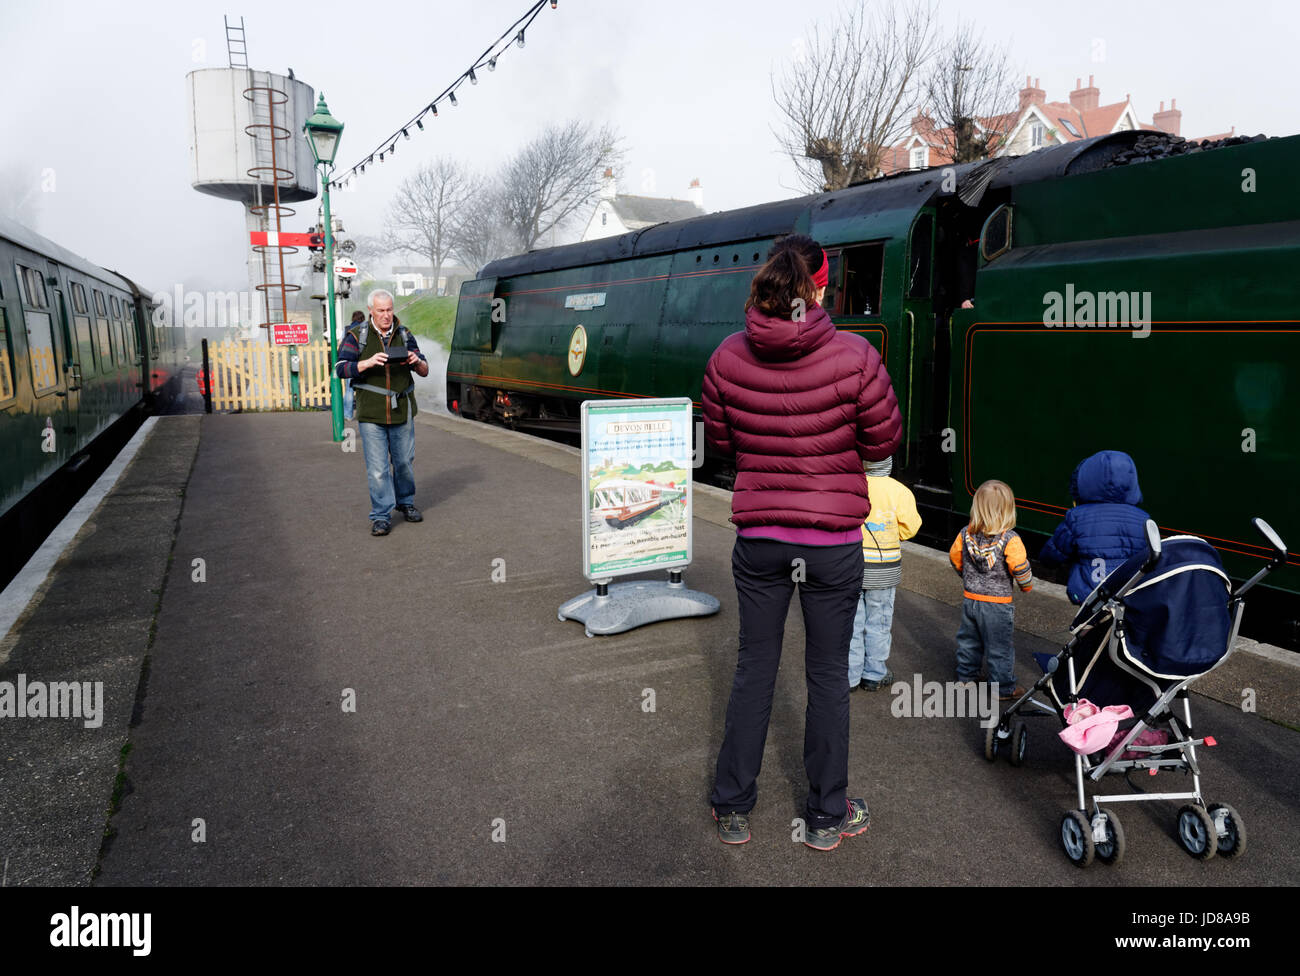 Families and children watching the steam trains at Swanage on the Swanage Steam Railway. The train is Battle of Britain class Manston 34070 Stock Photo